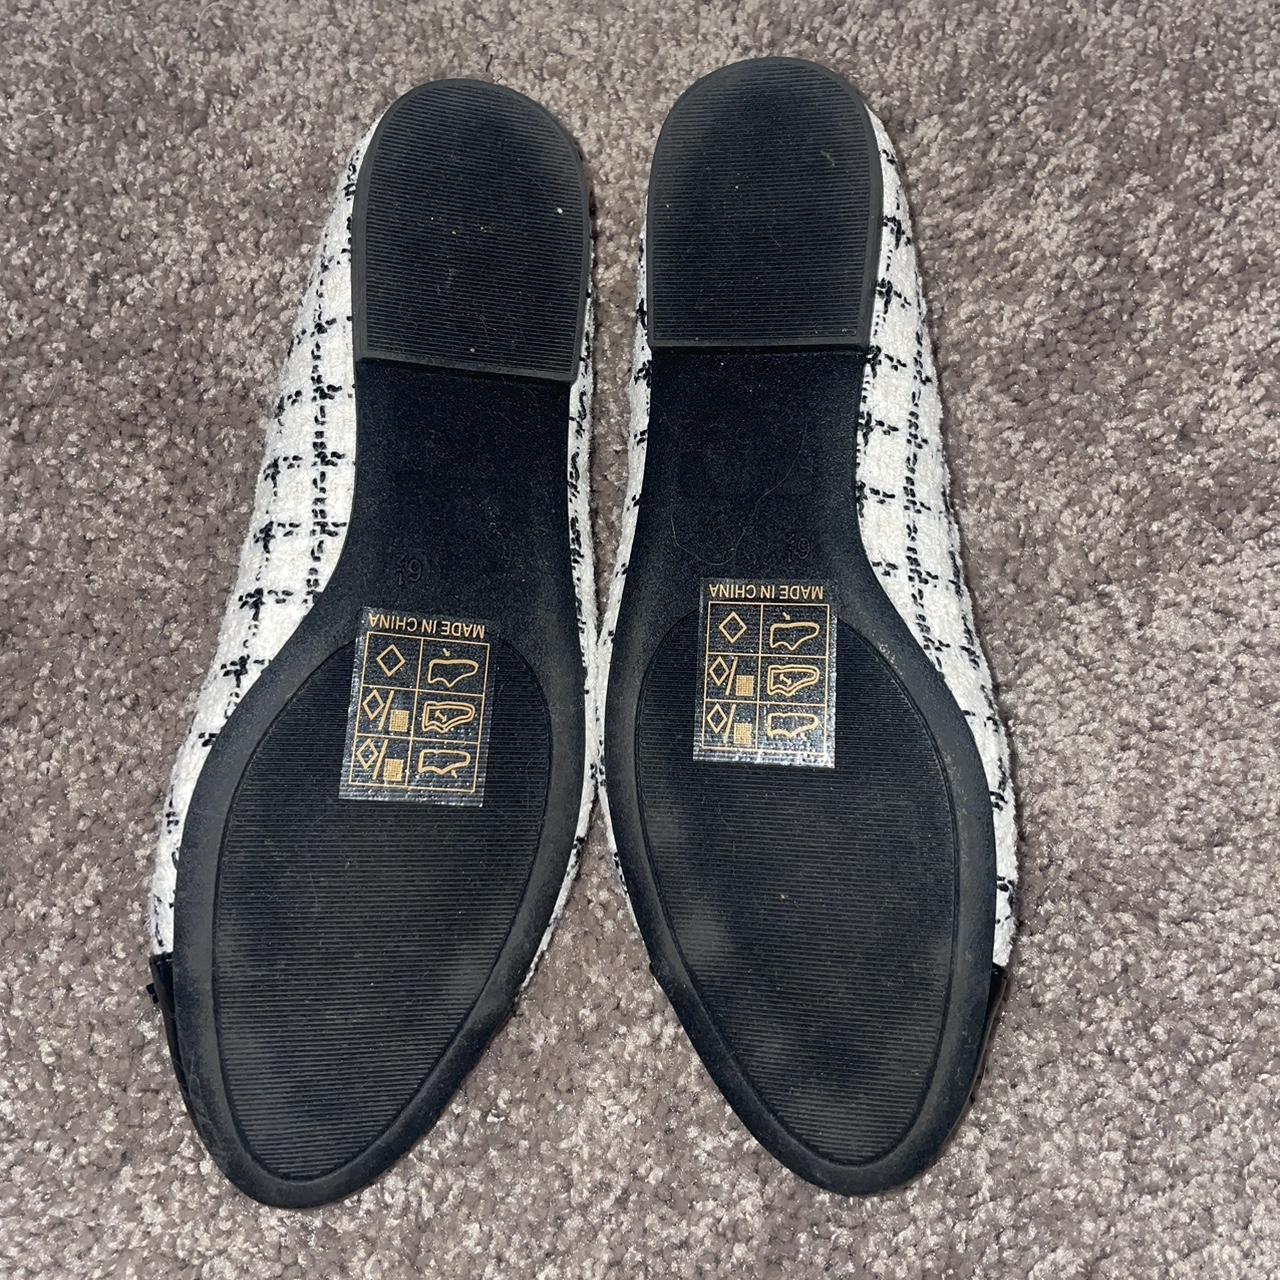 Black and white tweed ballet flats! These are such a... - Depop